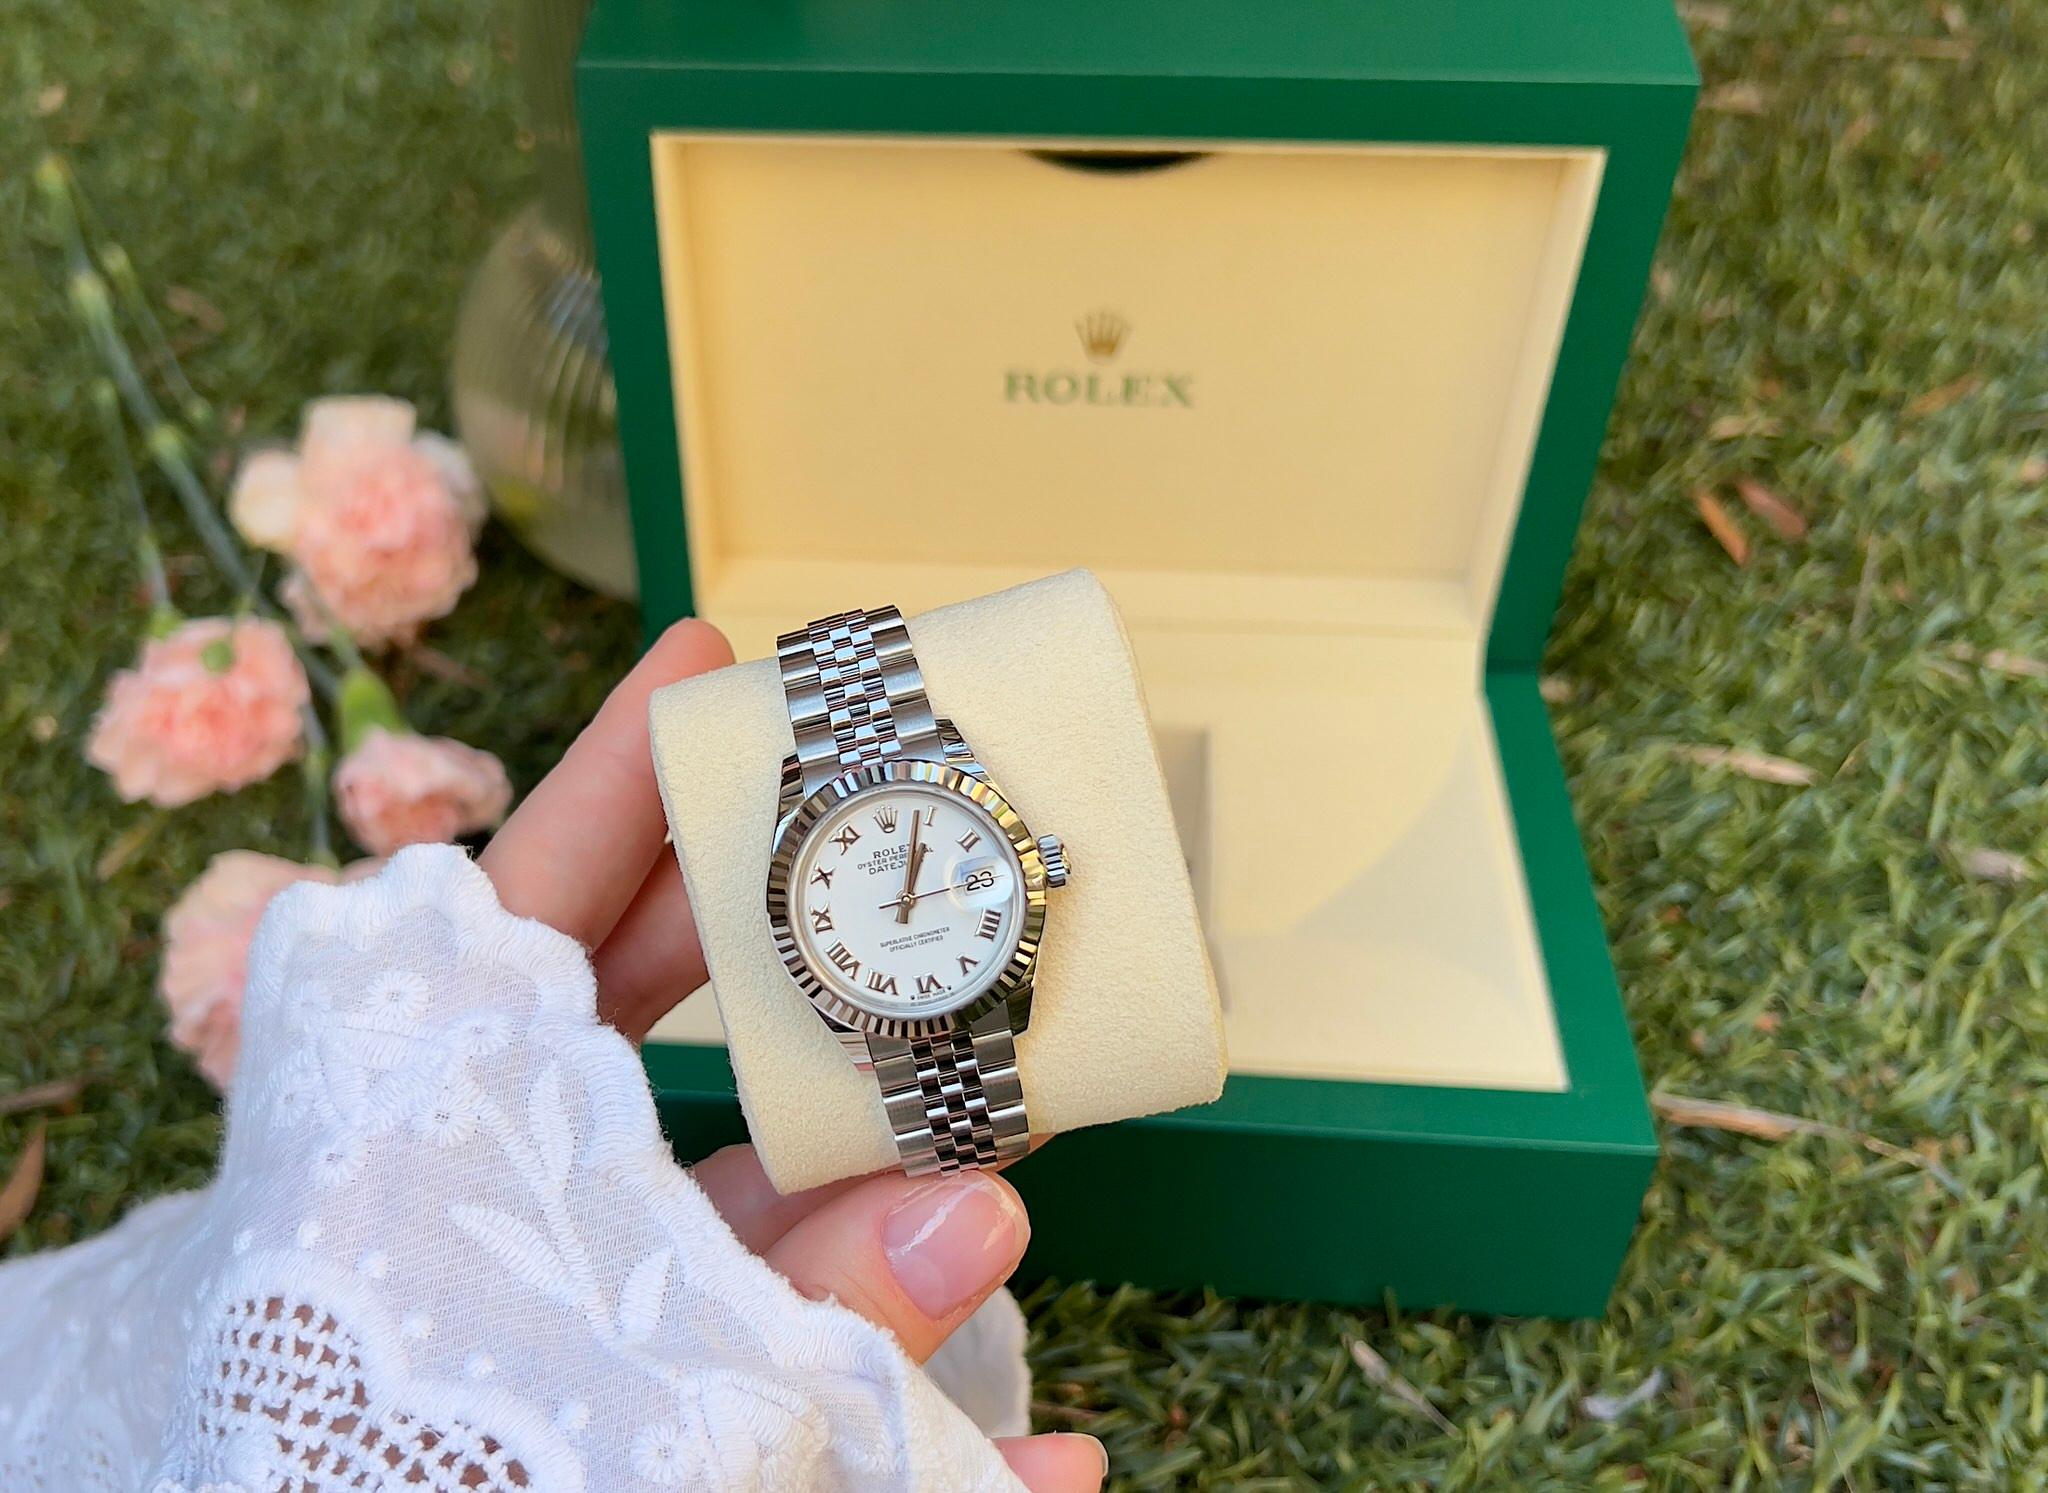 Brand: Rolex
Model: Lady-Datejust
Model Number: 279174
Year: 2022
Metal: Oystersteel
Bezel: Fluted
Bracelet: Jubilee
It comes with the Original Box & Papers